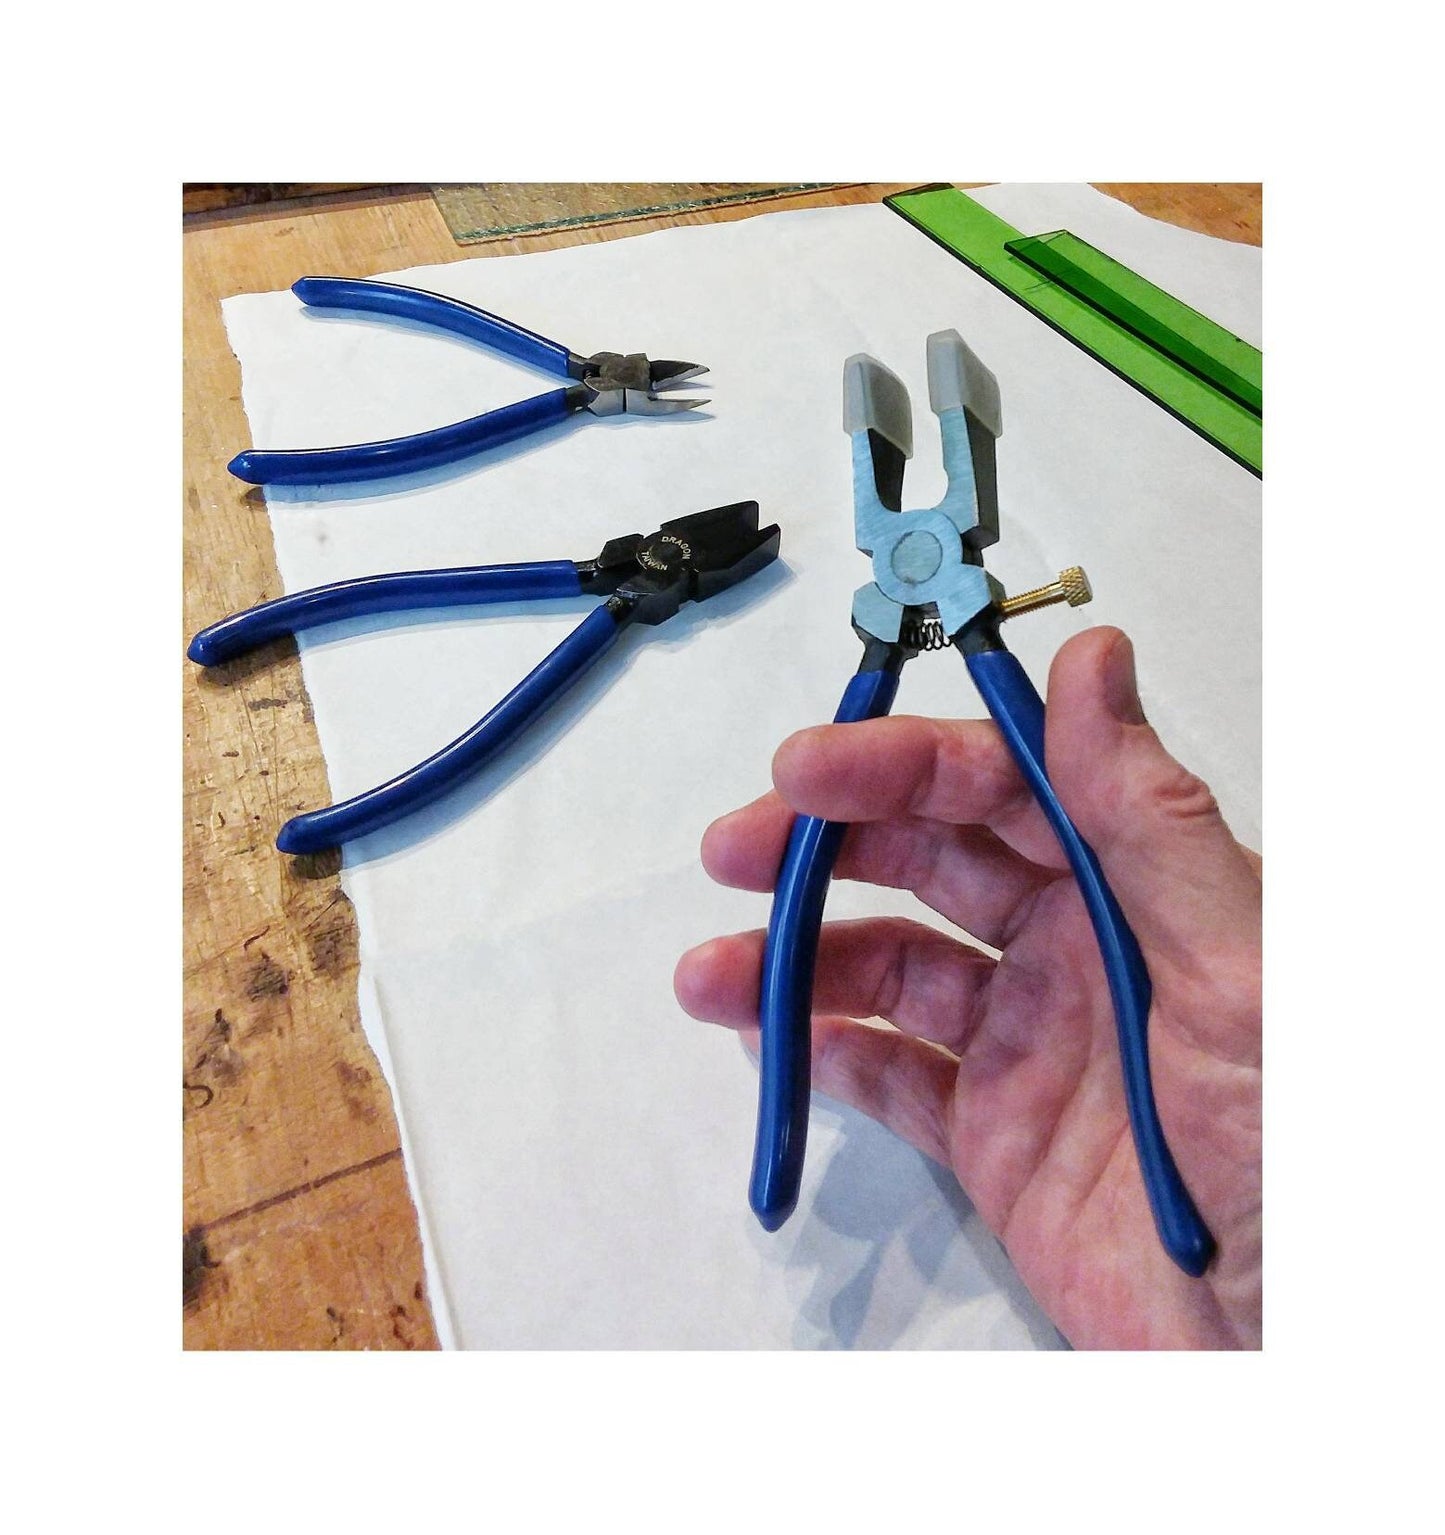 Stained Glass Running Plier, curved jaw forces scoreline to run, break. Easy to use Blue Handle. Fits well for smaller hands.